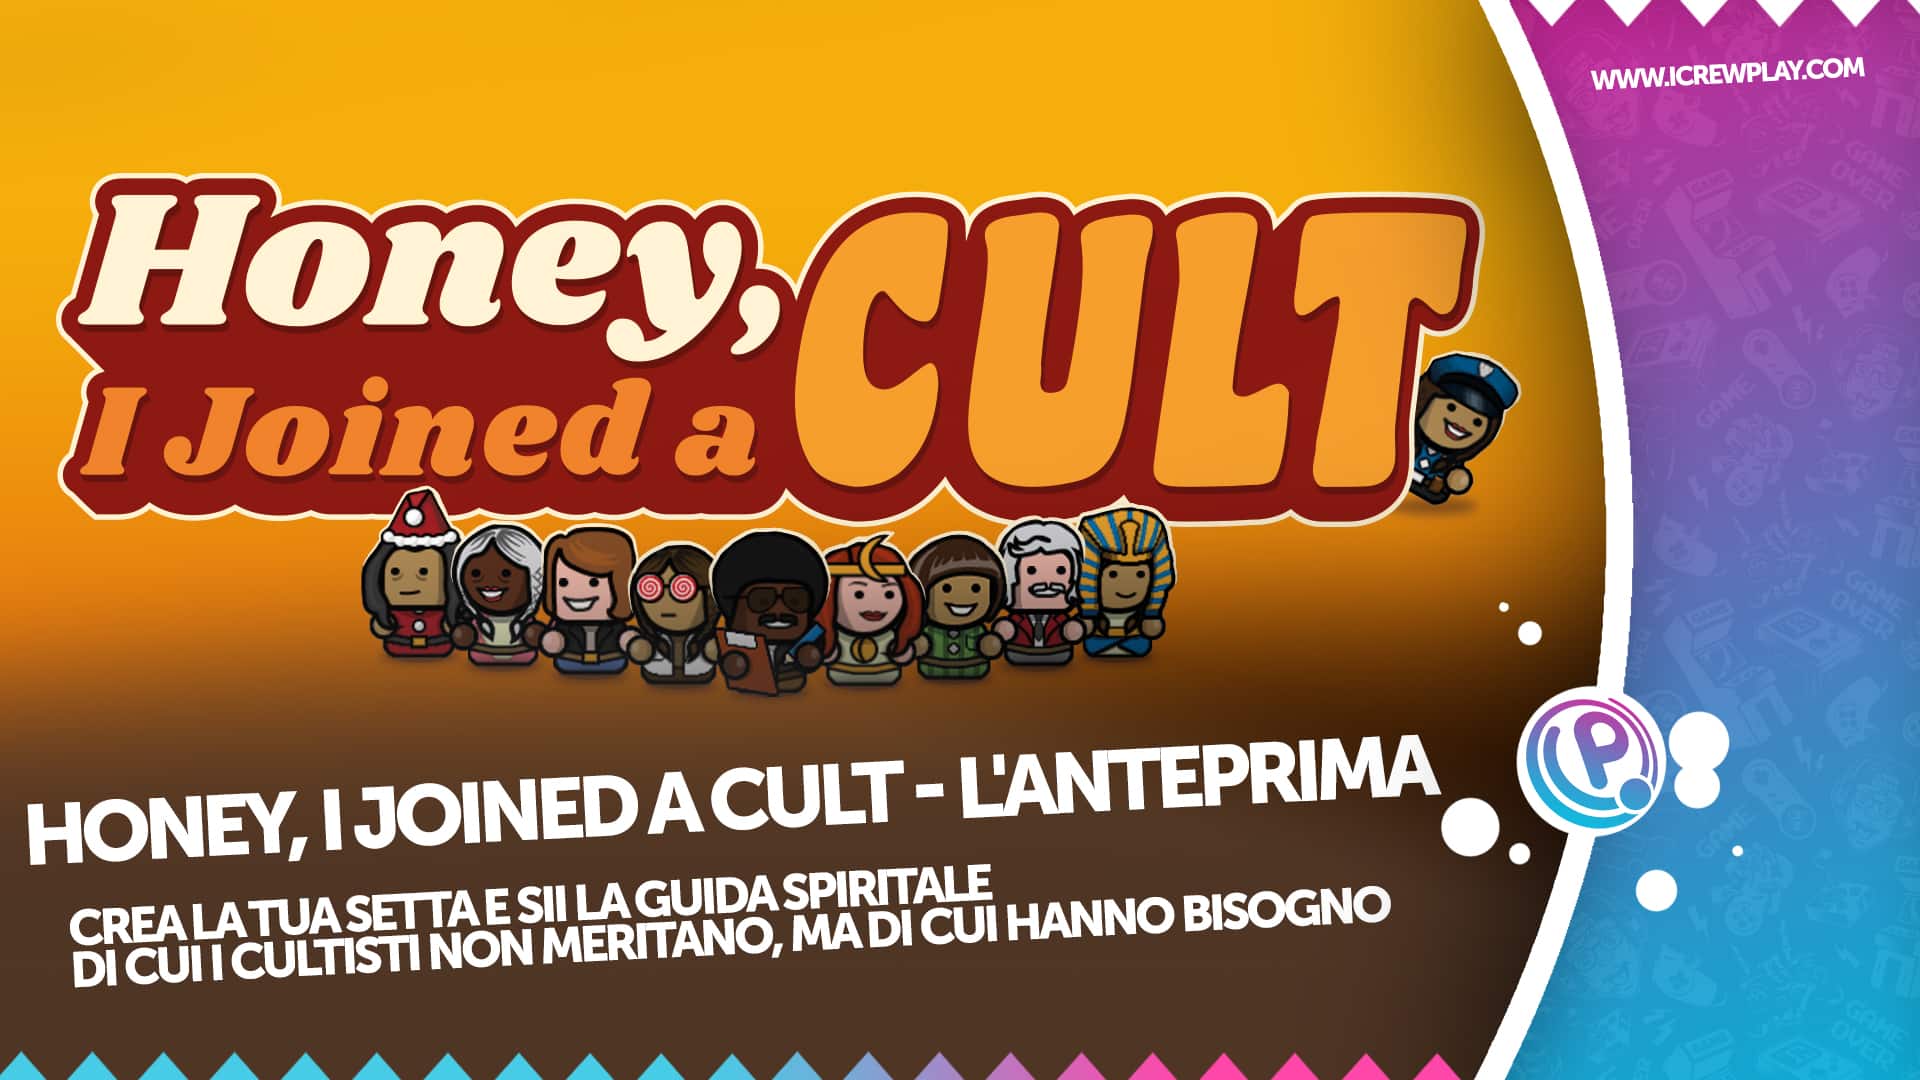 Honey, I joined a cult